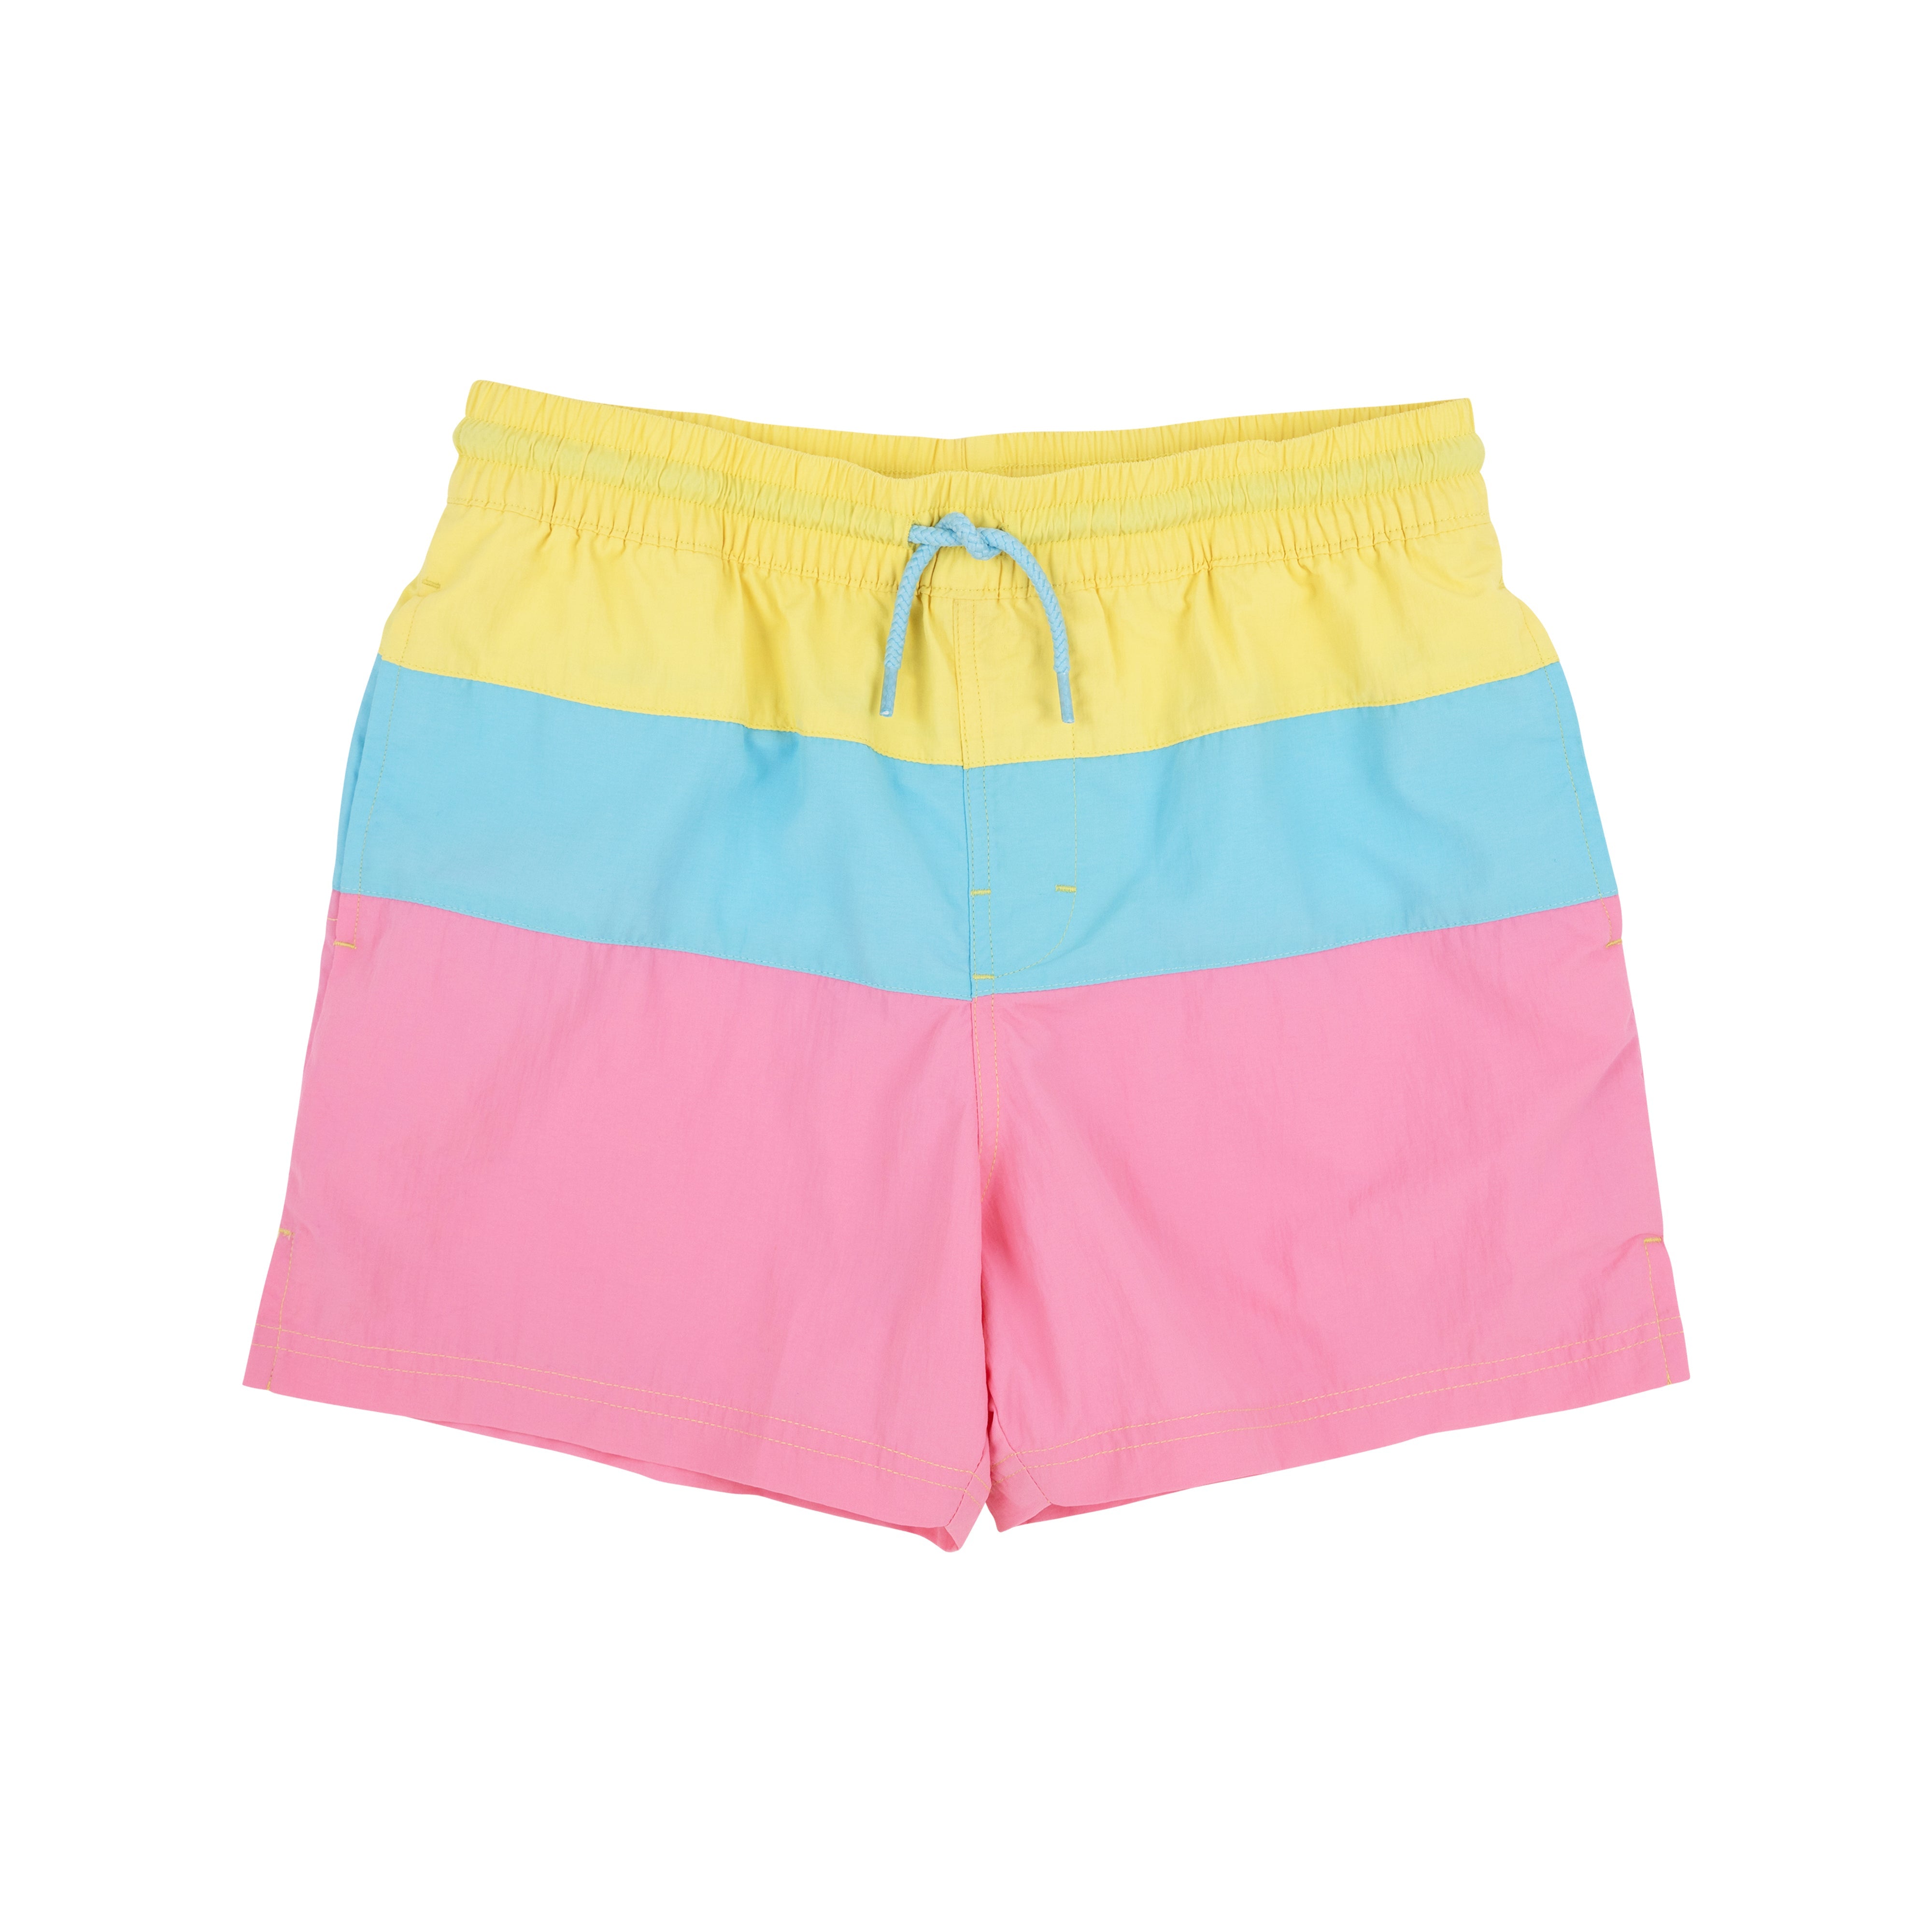 TBBC Country Club Colorblock Trunk Yellow Blue Pink